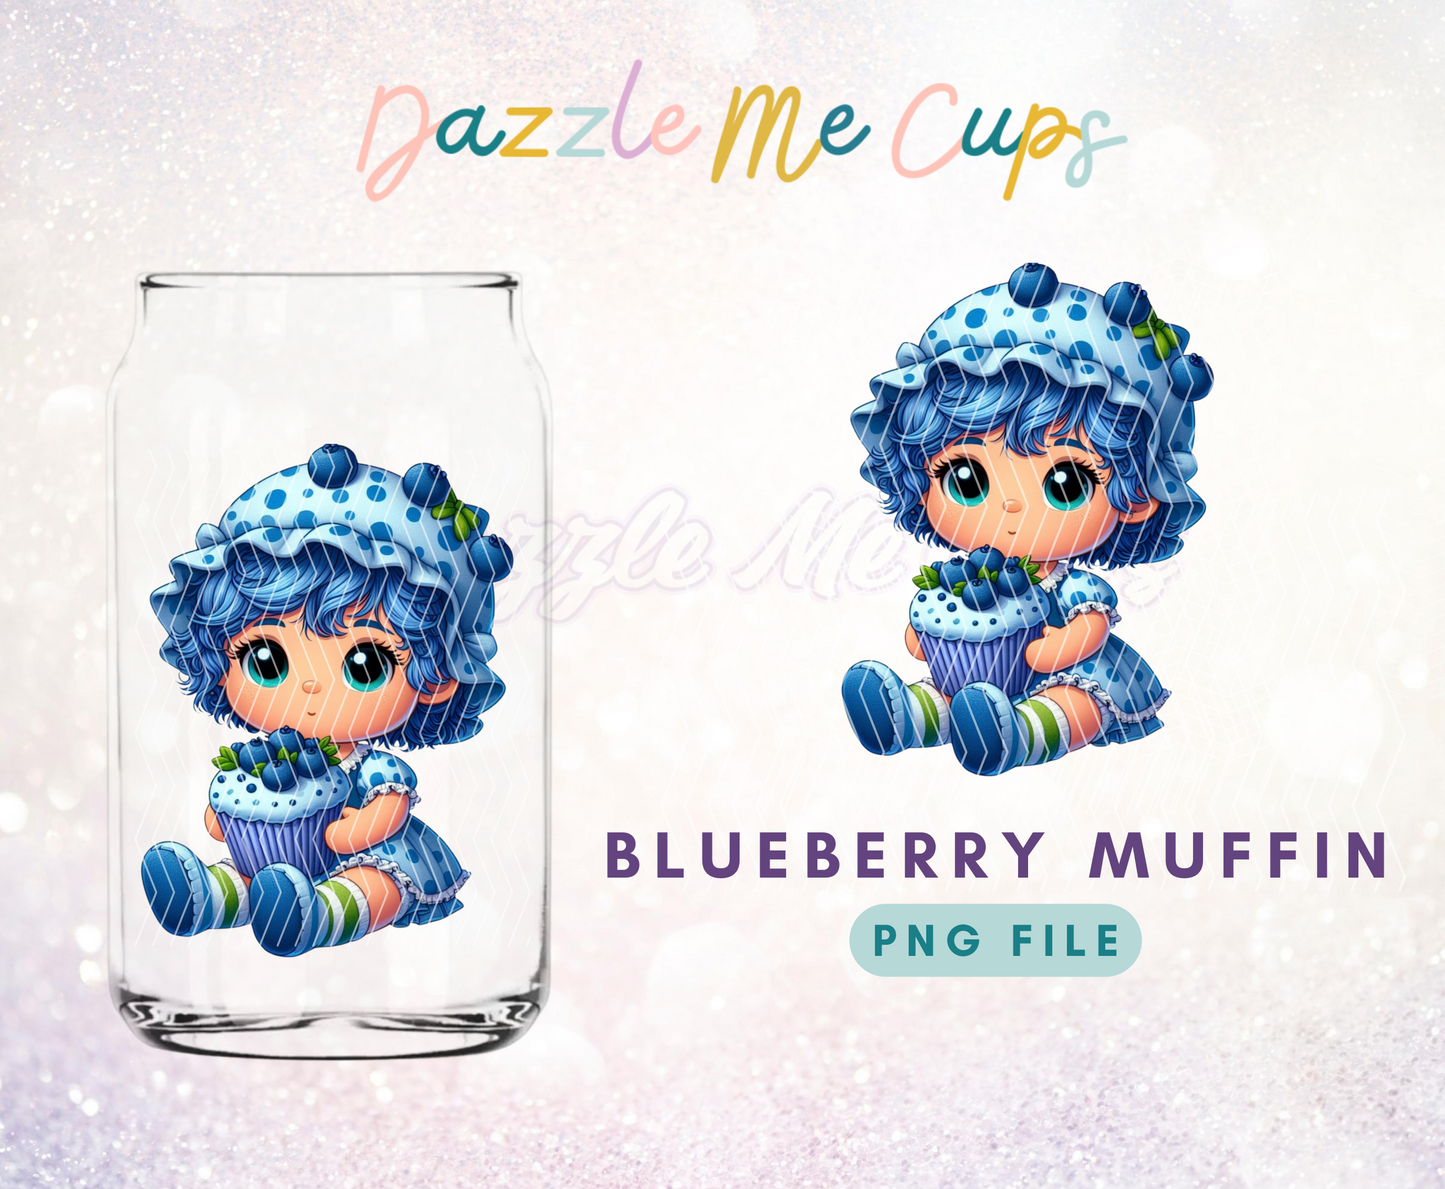 Blueberry muffin PNG